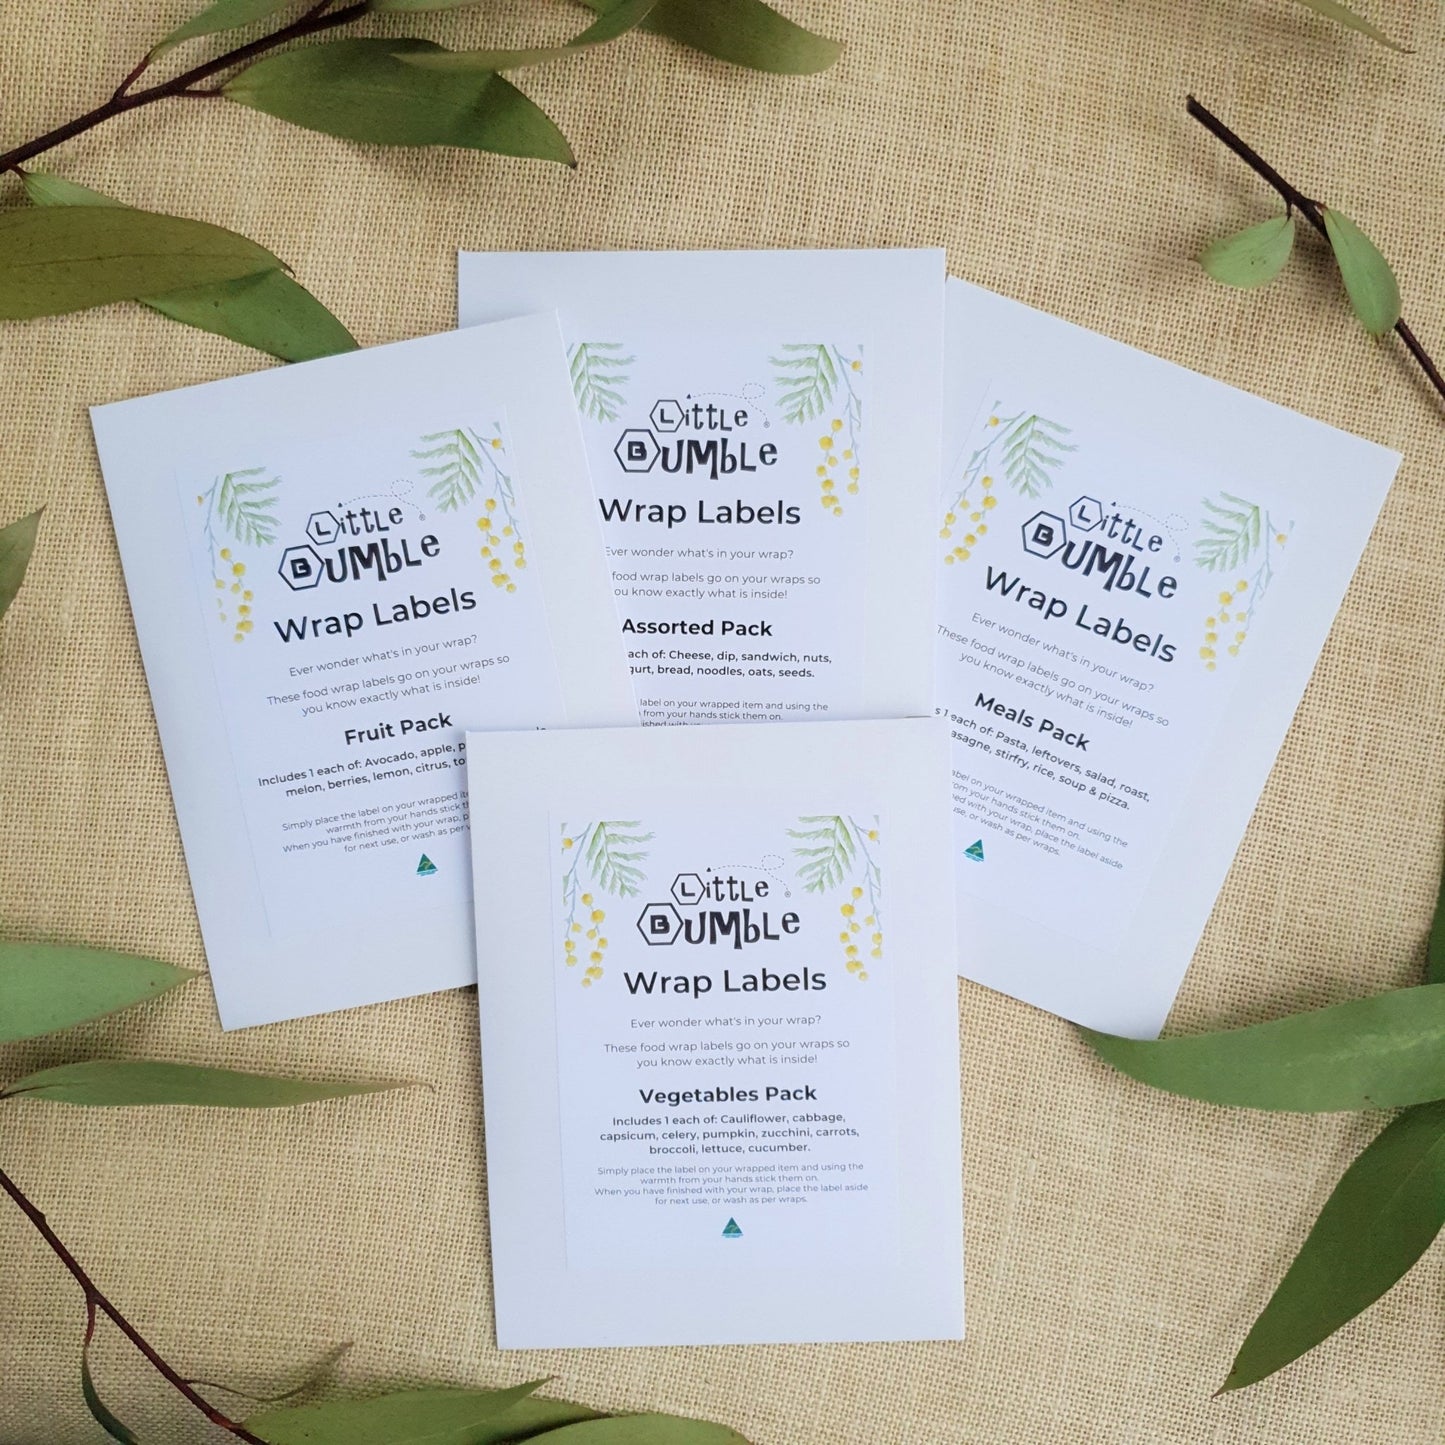 Wrap Labels - PACKS - Label your wraps to find food faster! - Little Bumble Reusable Food Wraps